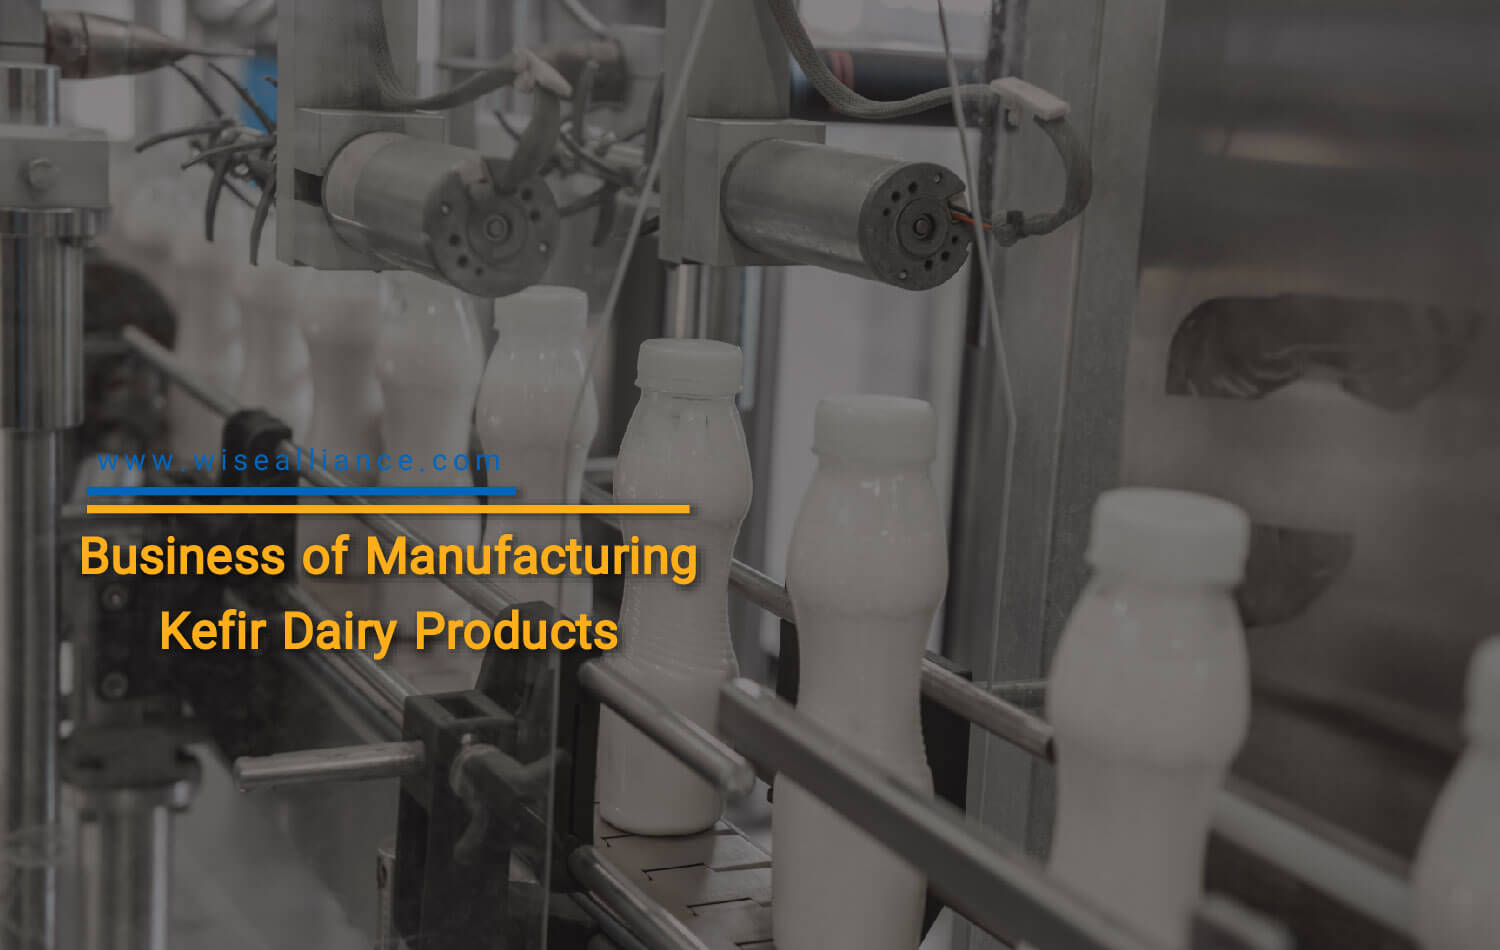 Business of Manufacturing Kefir Dairy Products